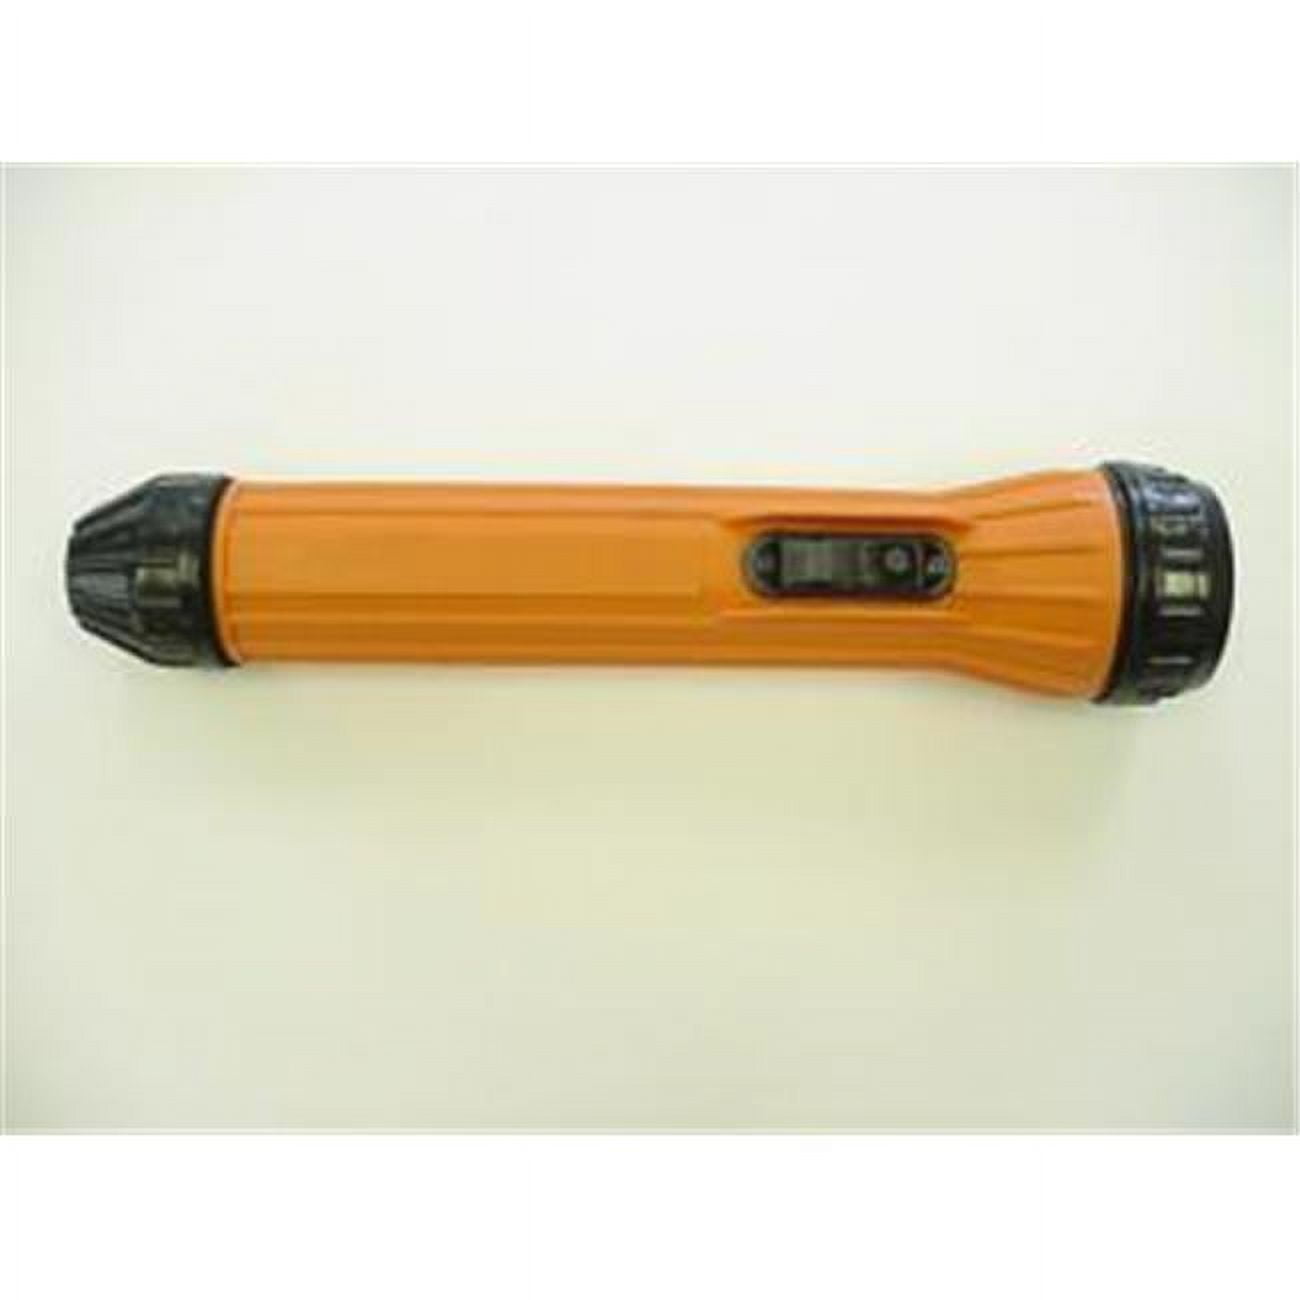 Picture of Datrex DX3422M 3-Way Flashlight Excl 3 D-Cell Commercial